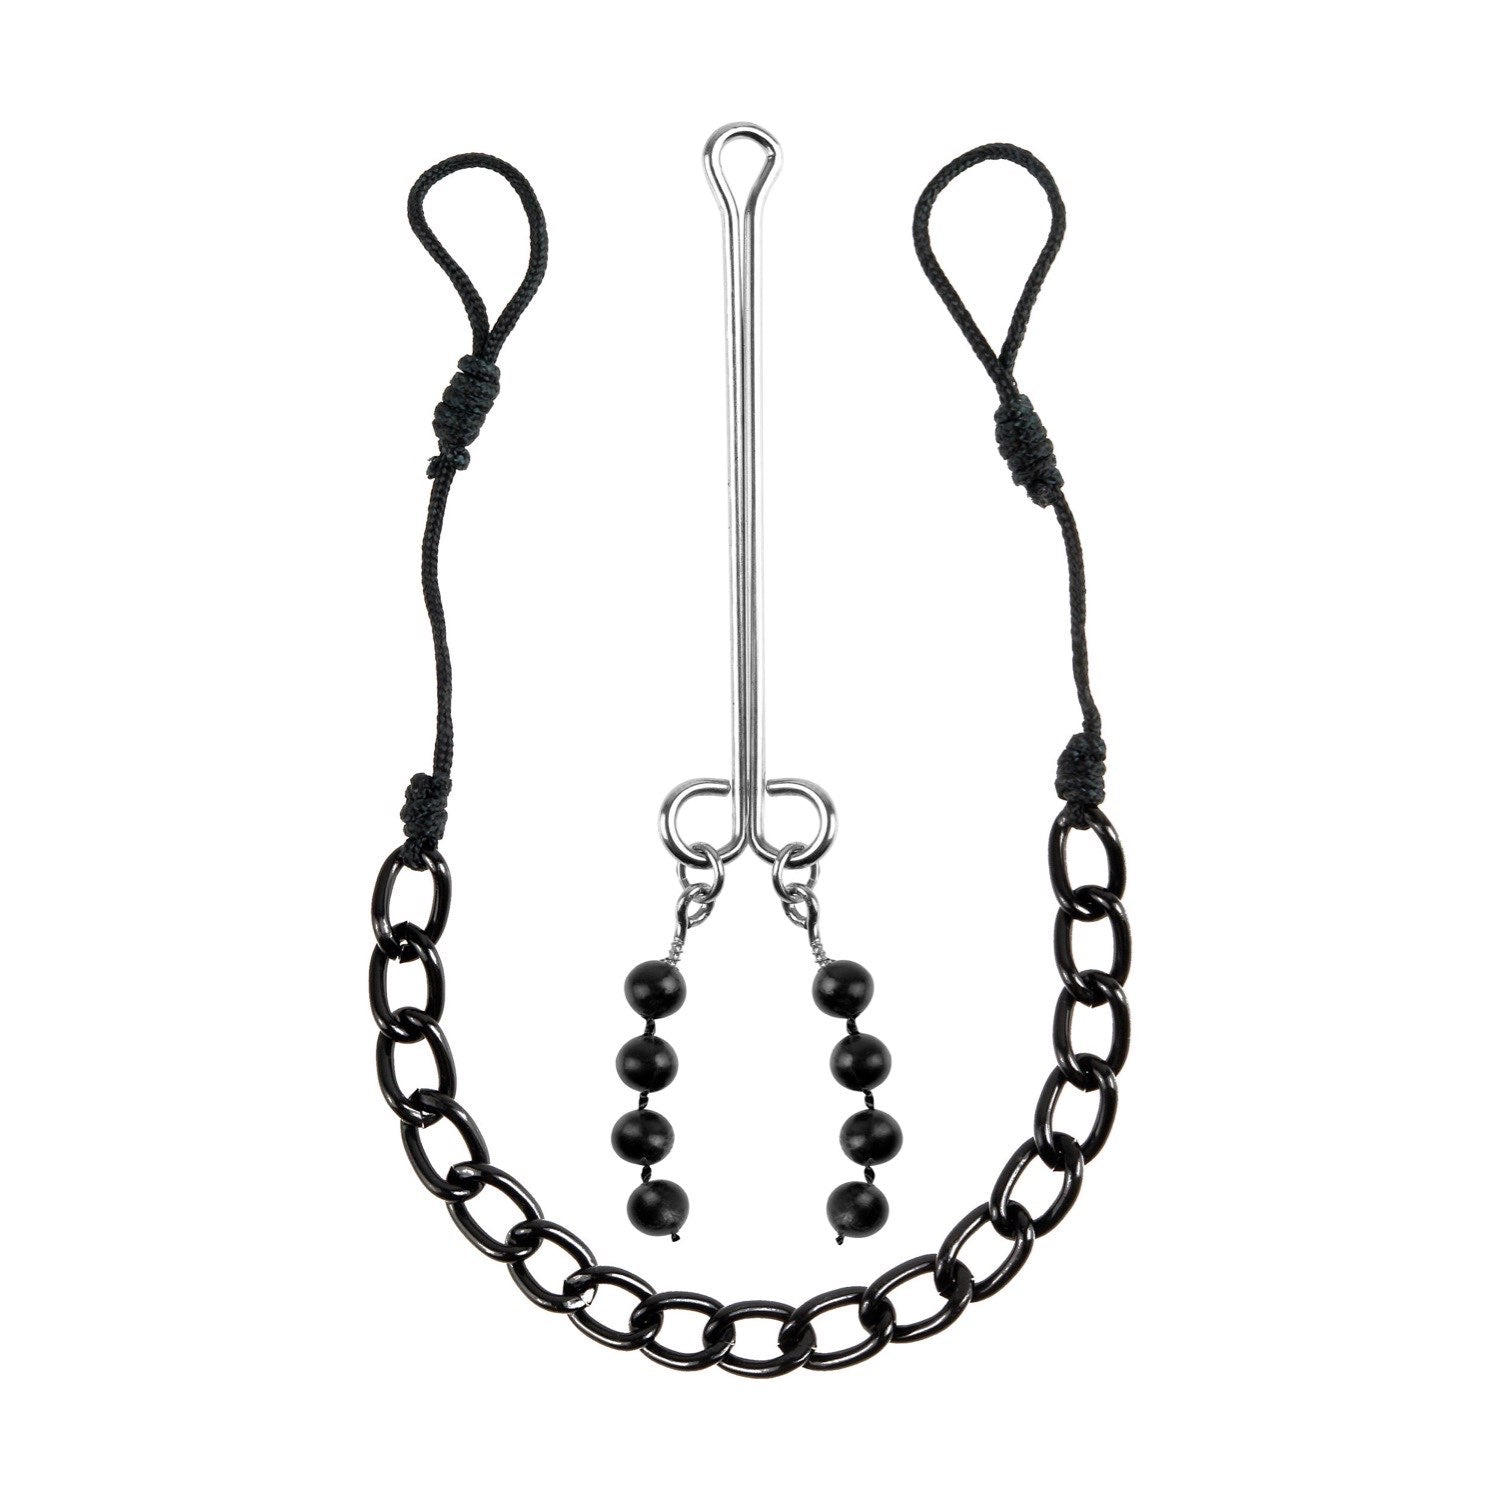 Fetish Fantasy Series Limited Edition Nipple &amp; Clit Jewelry - Black Non-Piercing Body Jewelry - 2 Piece Set by Pipedream